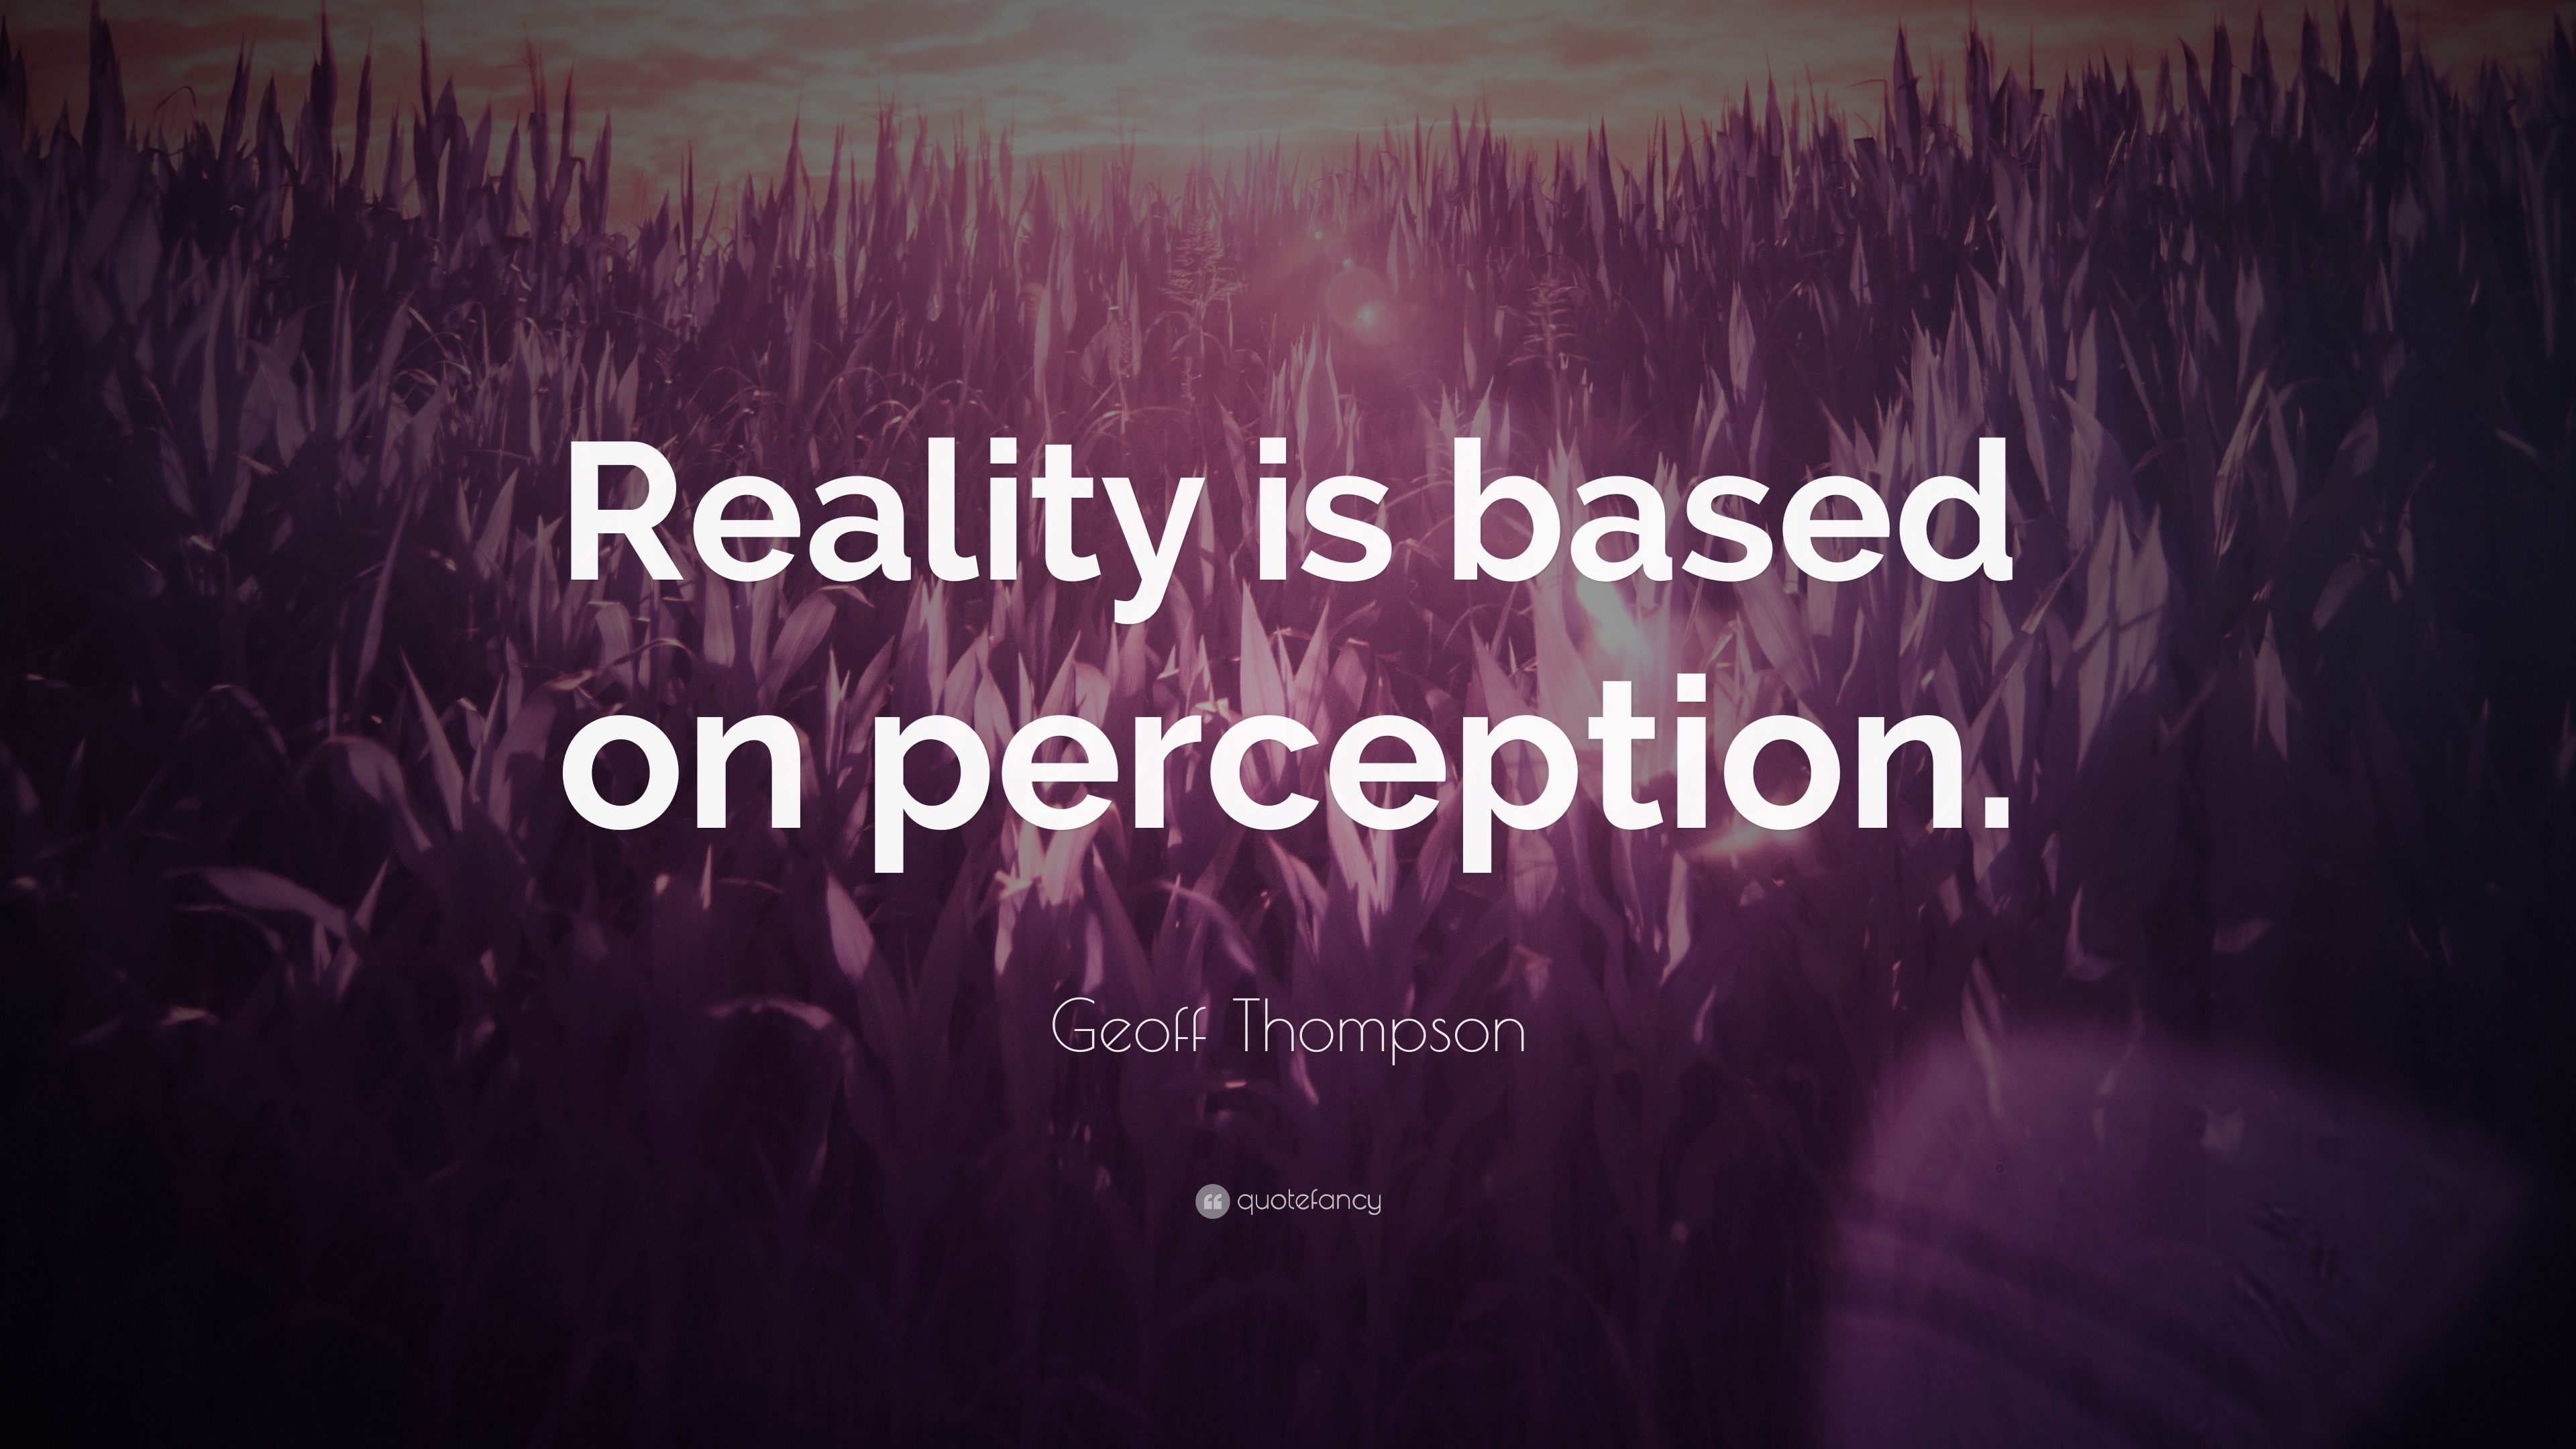 Geoff Thompson Quote “Reality is based on perception.” (7